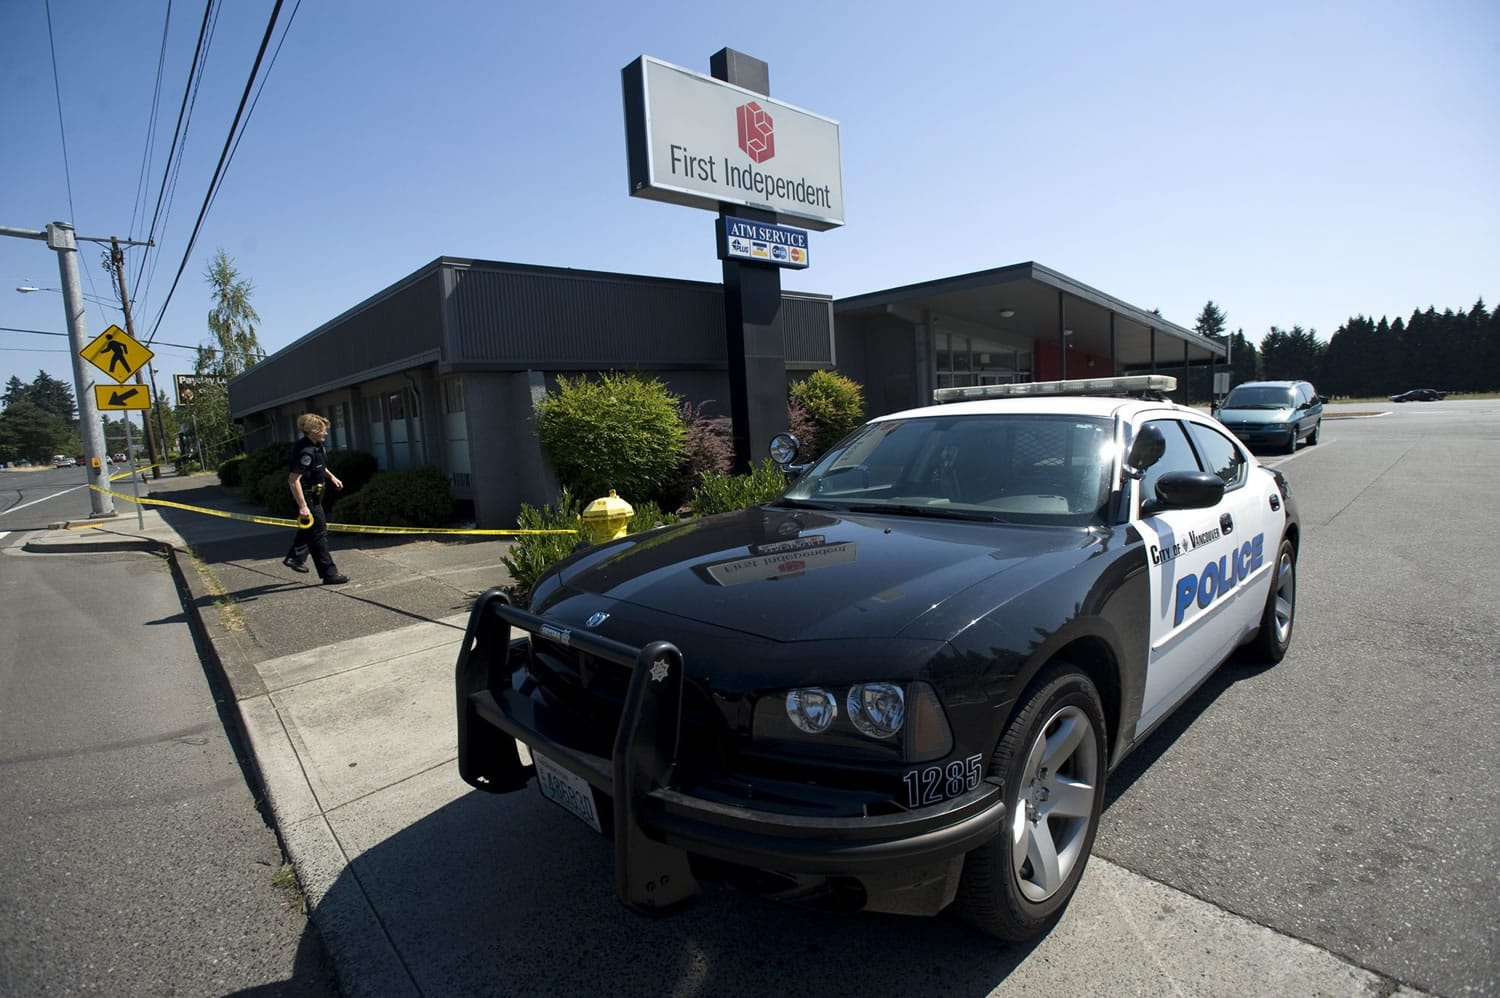 Vancouver police set up crime scene tape after a bank robbery Friday.